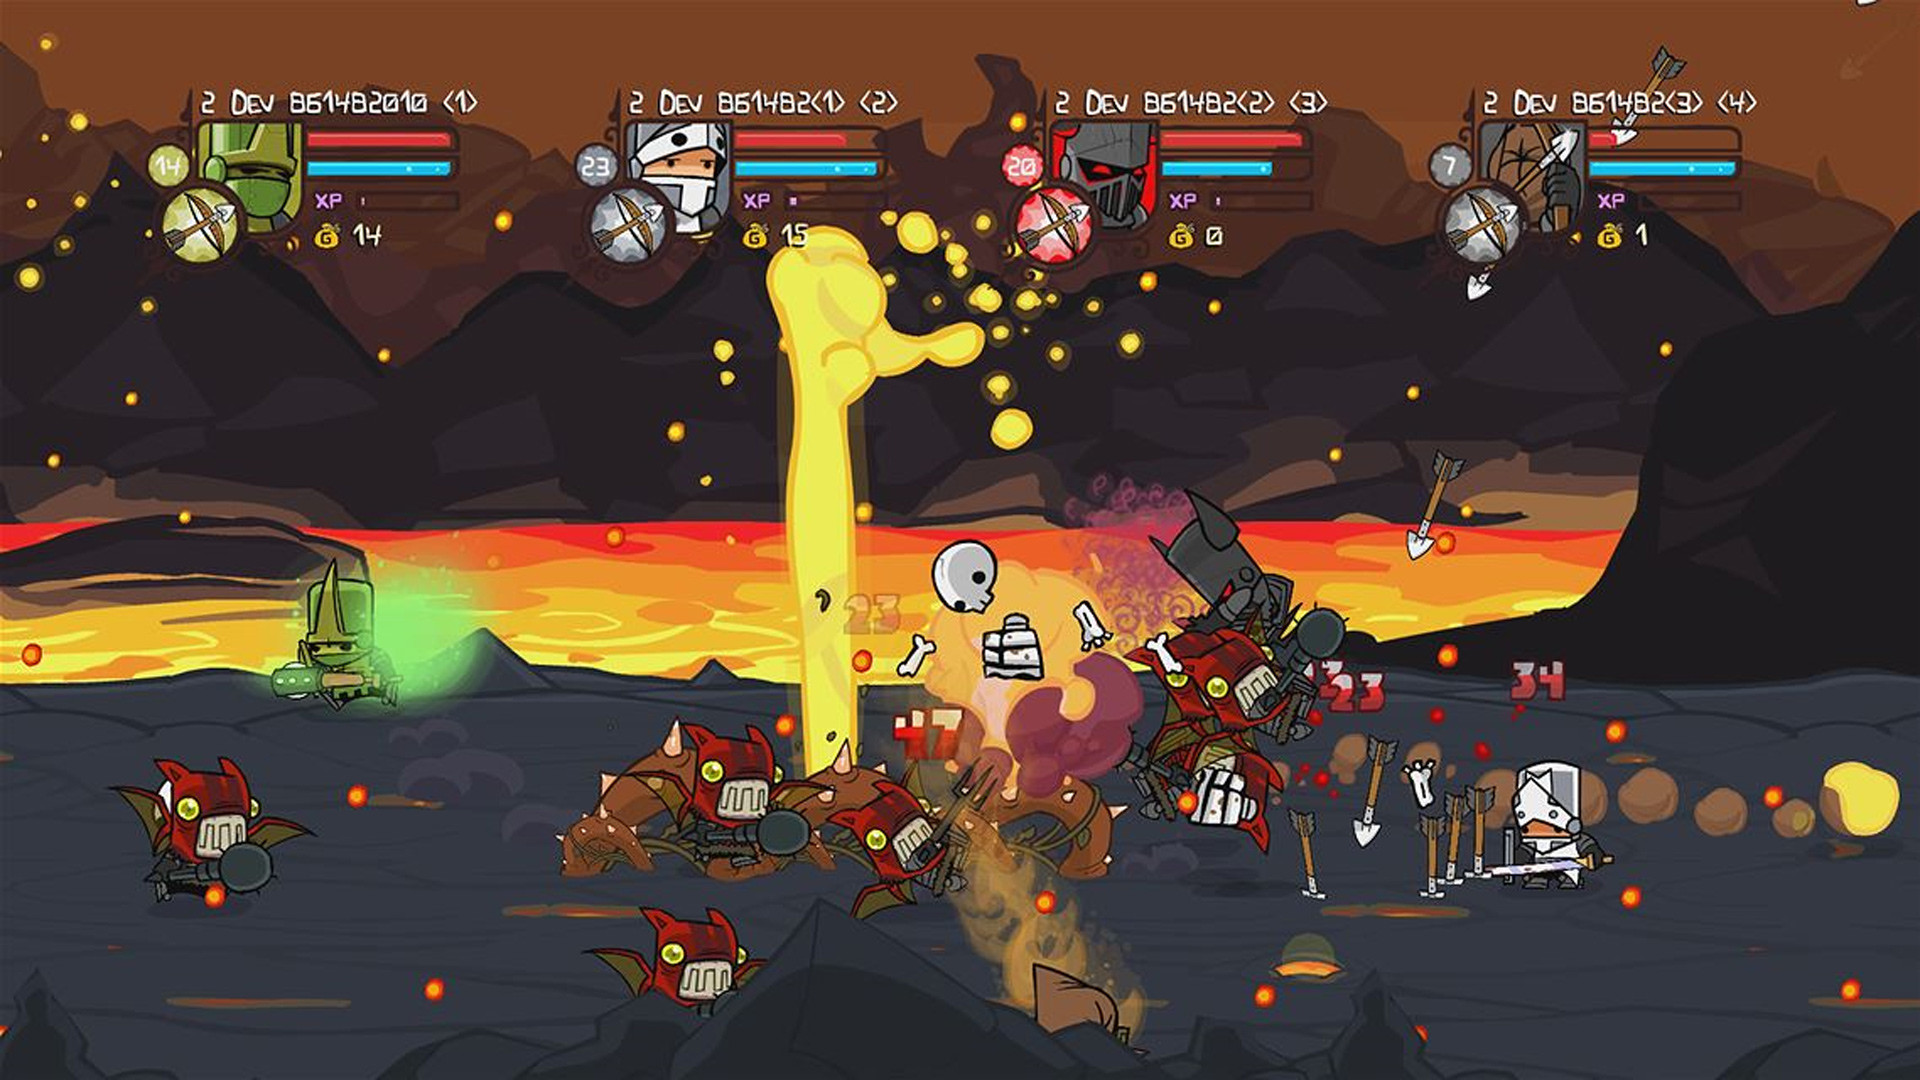 1920x1080 There are far more images available for Castle Crashers, but these are the  ones we felt would be most useful to you. If you have specific requests, ...